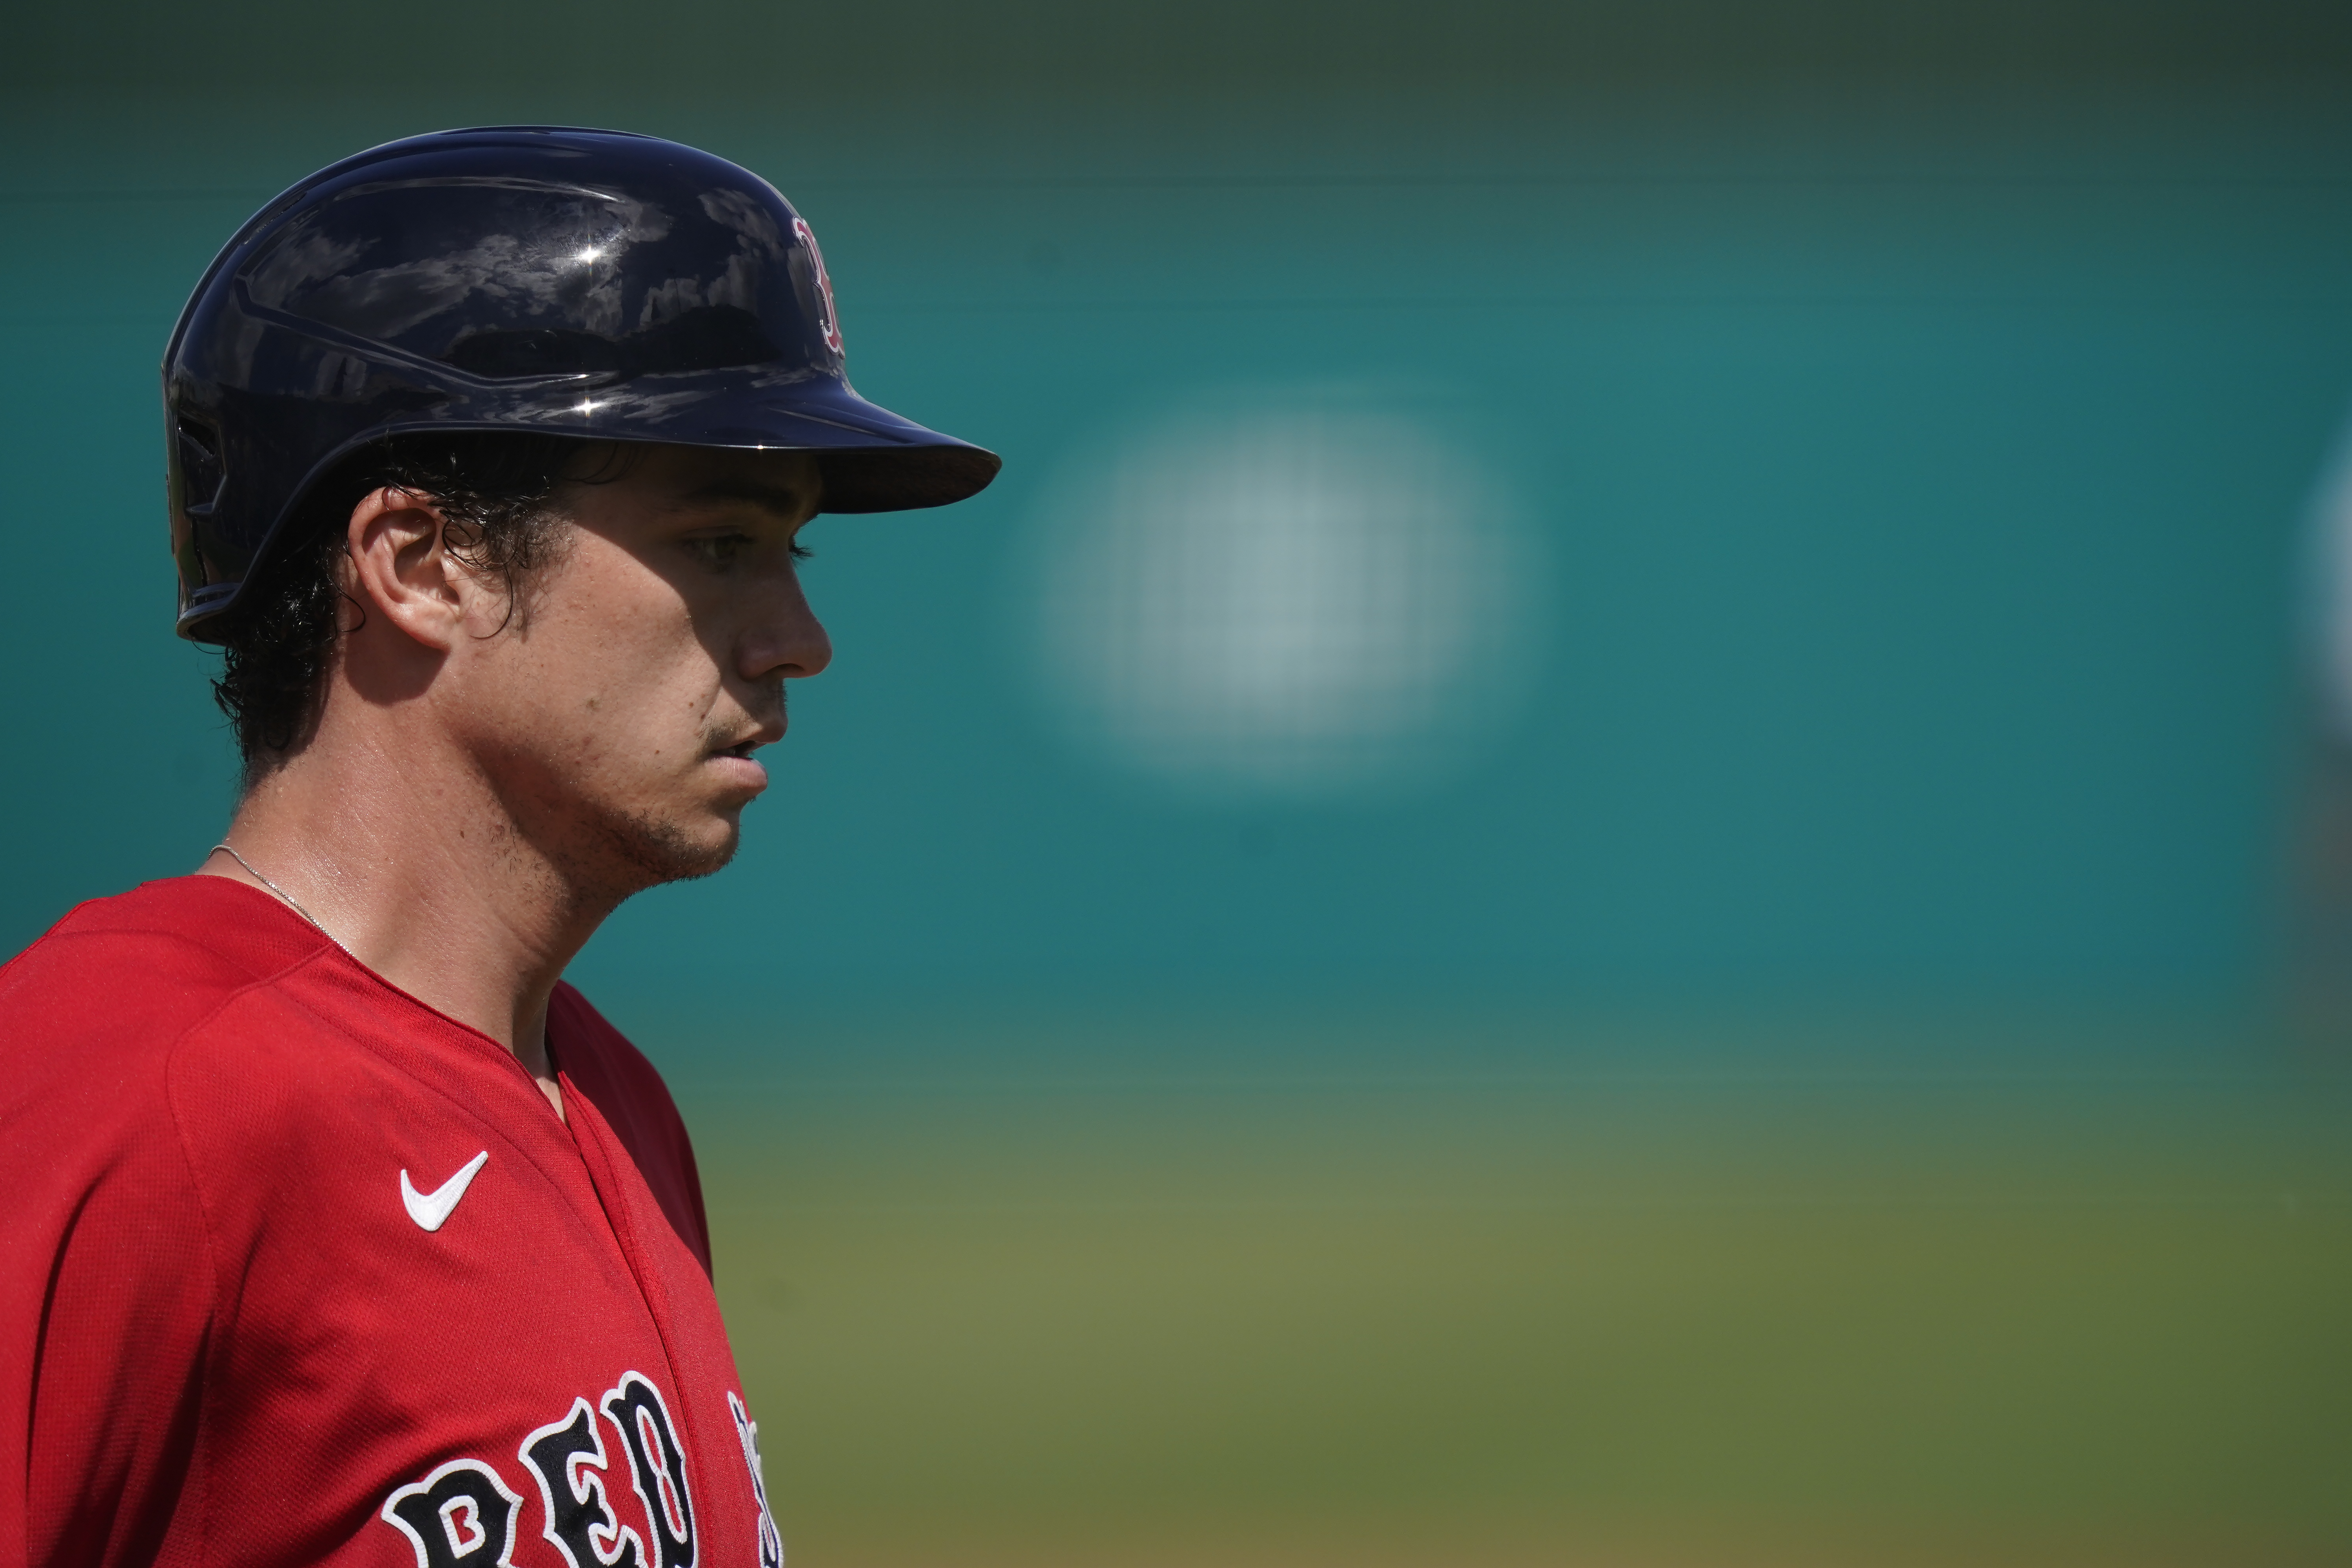 Boston Red Sox lineup: Bobby Dalbec, who is 11-for-28 (.393) with